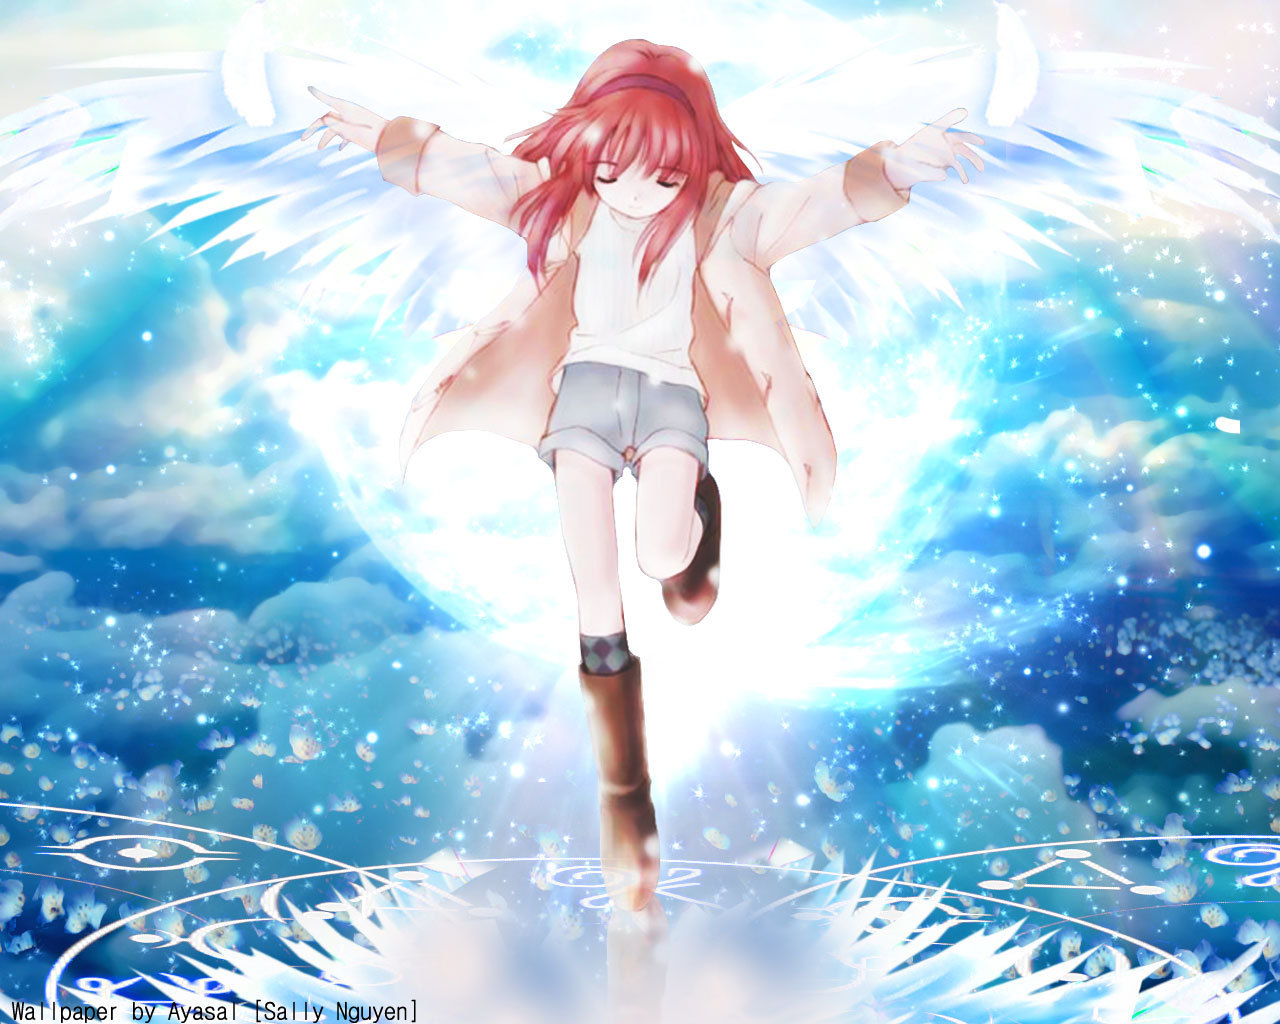 Kanon Image On My Way To Heaven HD Wallpaper And